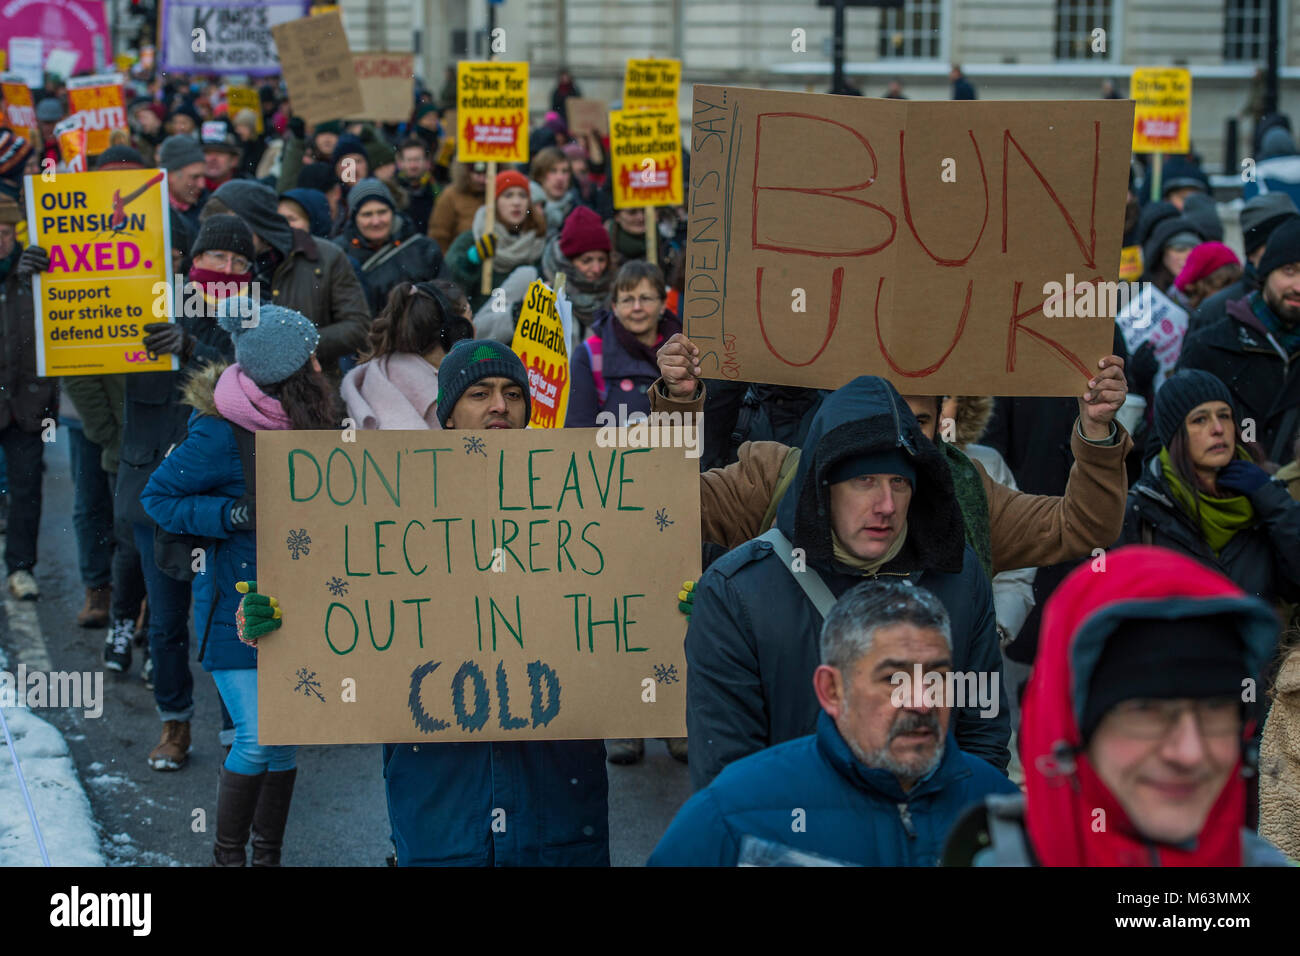 London, UK. 28th February, 2018. The UCU (University and College Union) organises a march to protest the changes to lecturers pensions as part of their strike action. The march started outside UCL in Malet Place andheaded to Westminster via Whitehall. Credit: Guy Bell/Alamy Live News Stock Photo